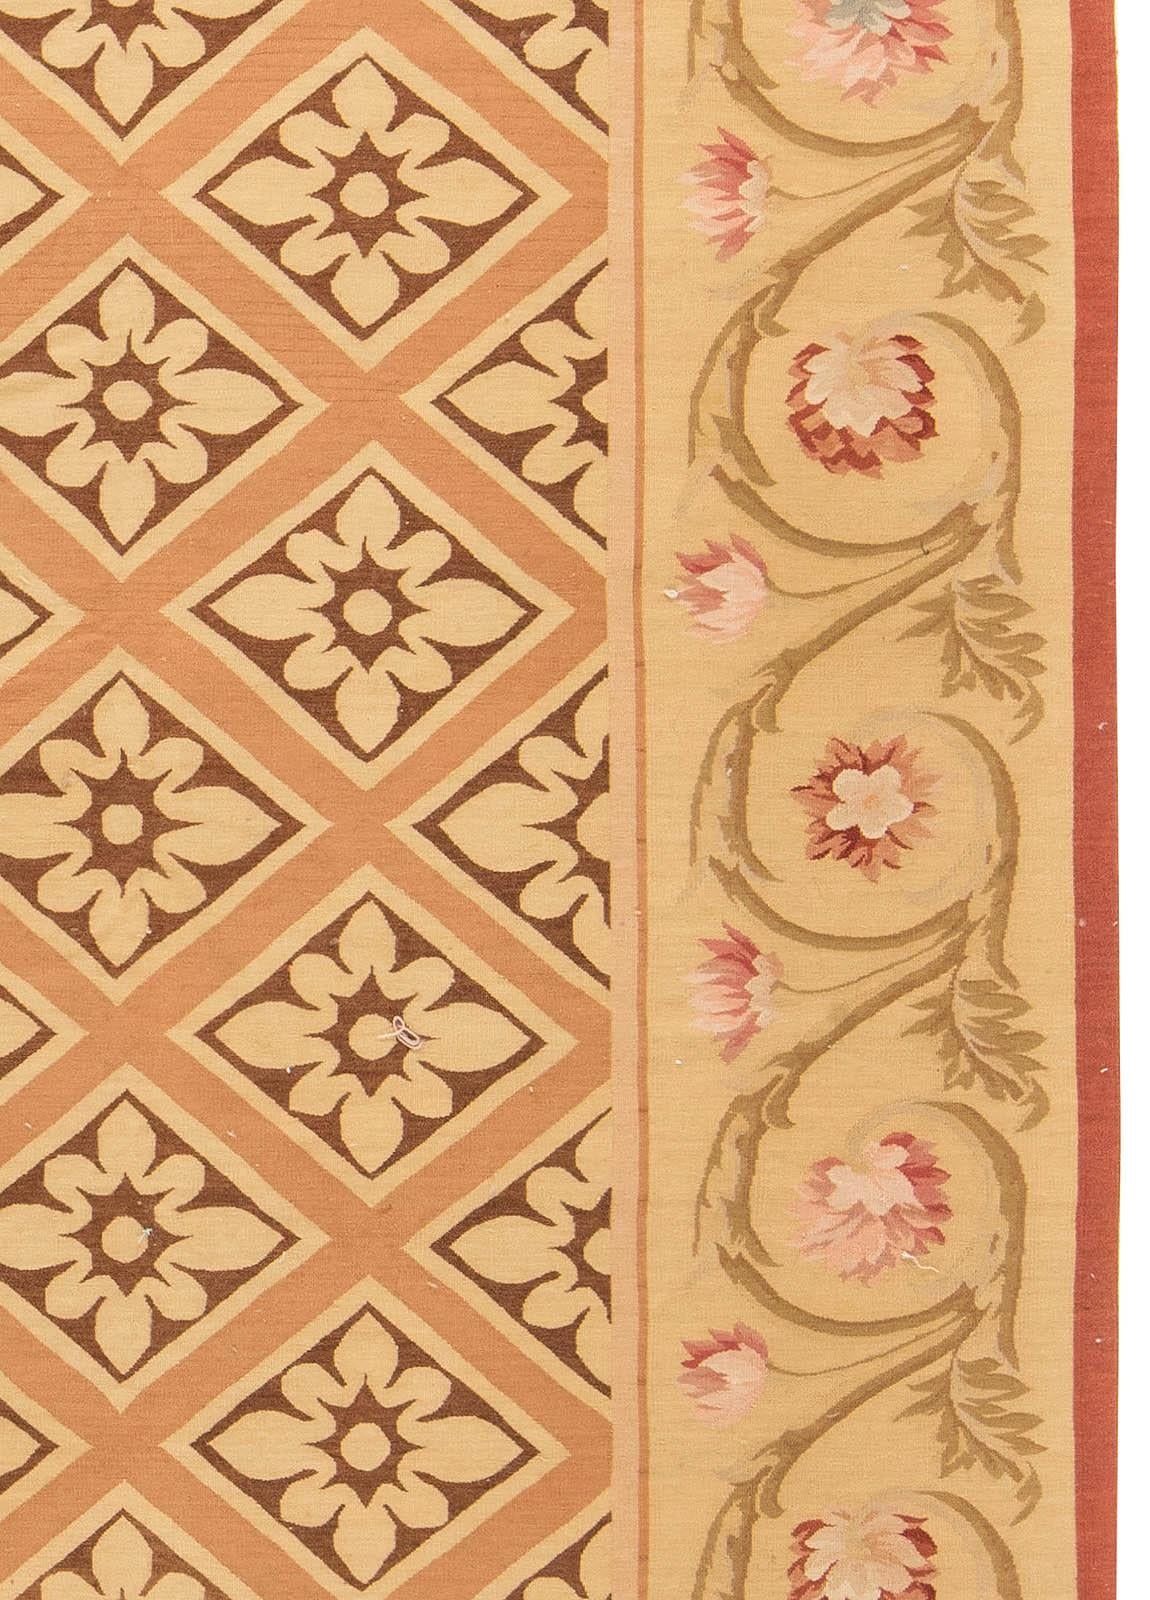 European Inspired Aubusson Rug by Doris Leslie Blau In New Condition For Sale In New York, NY